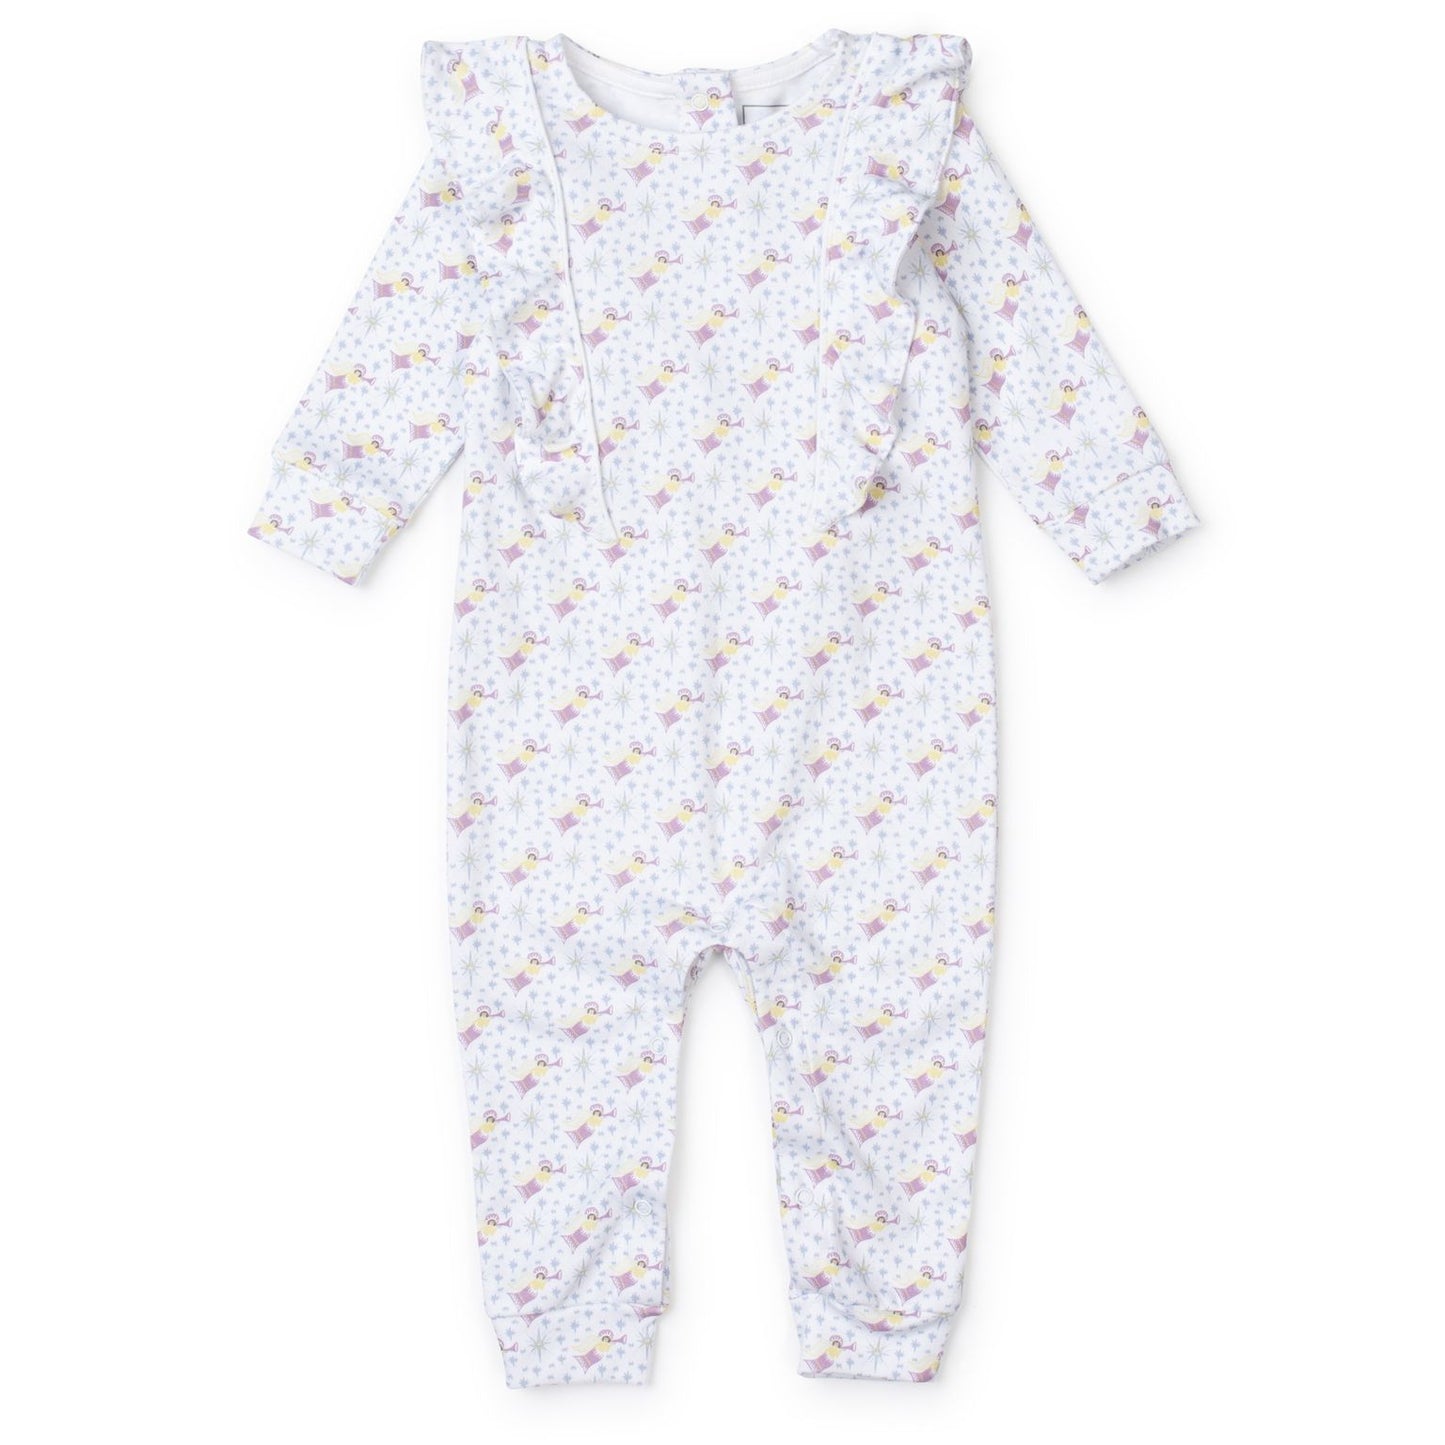 Lila and Hayes Evelyn Romper - Angels